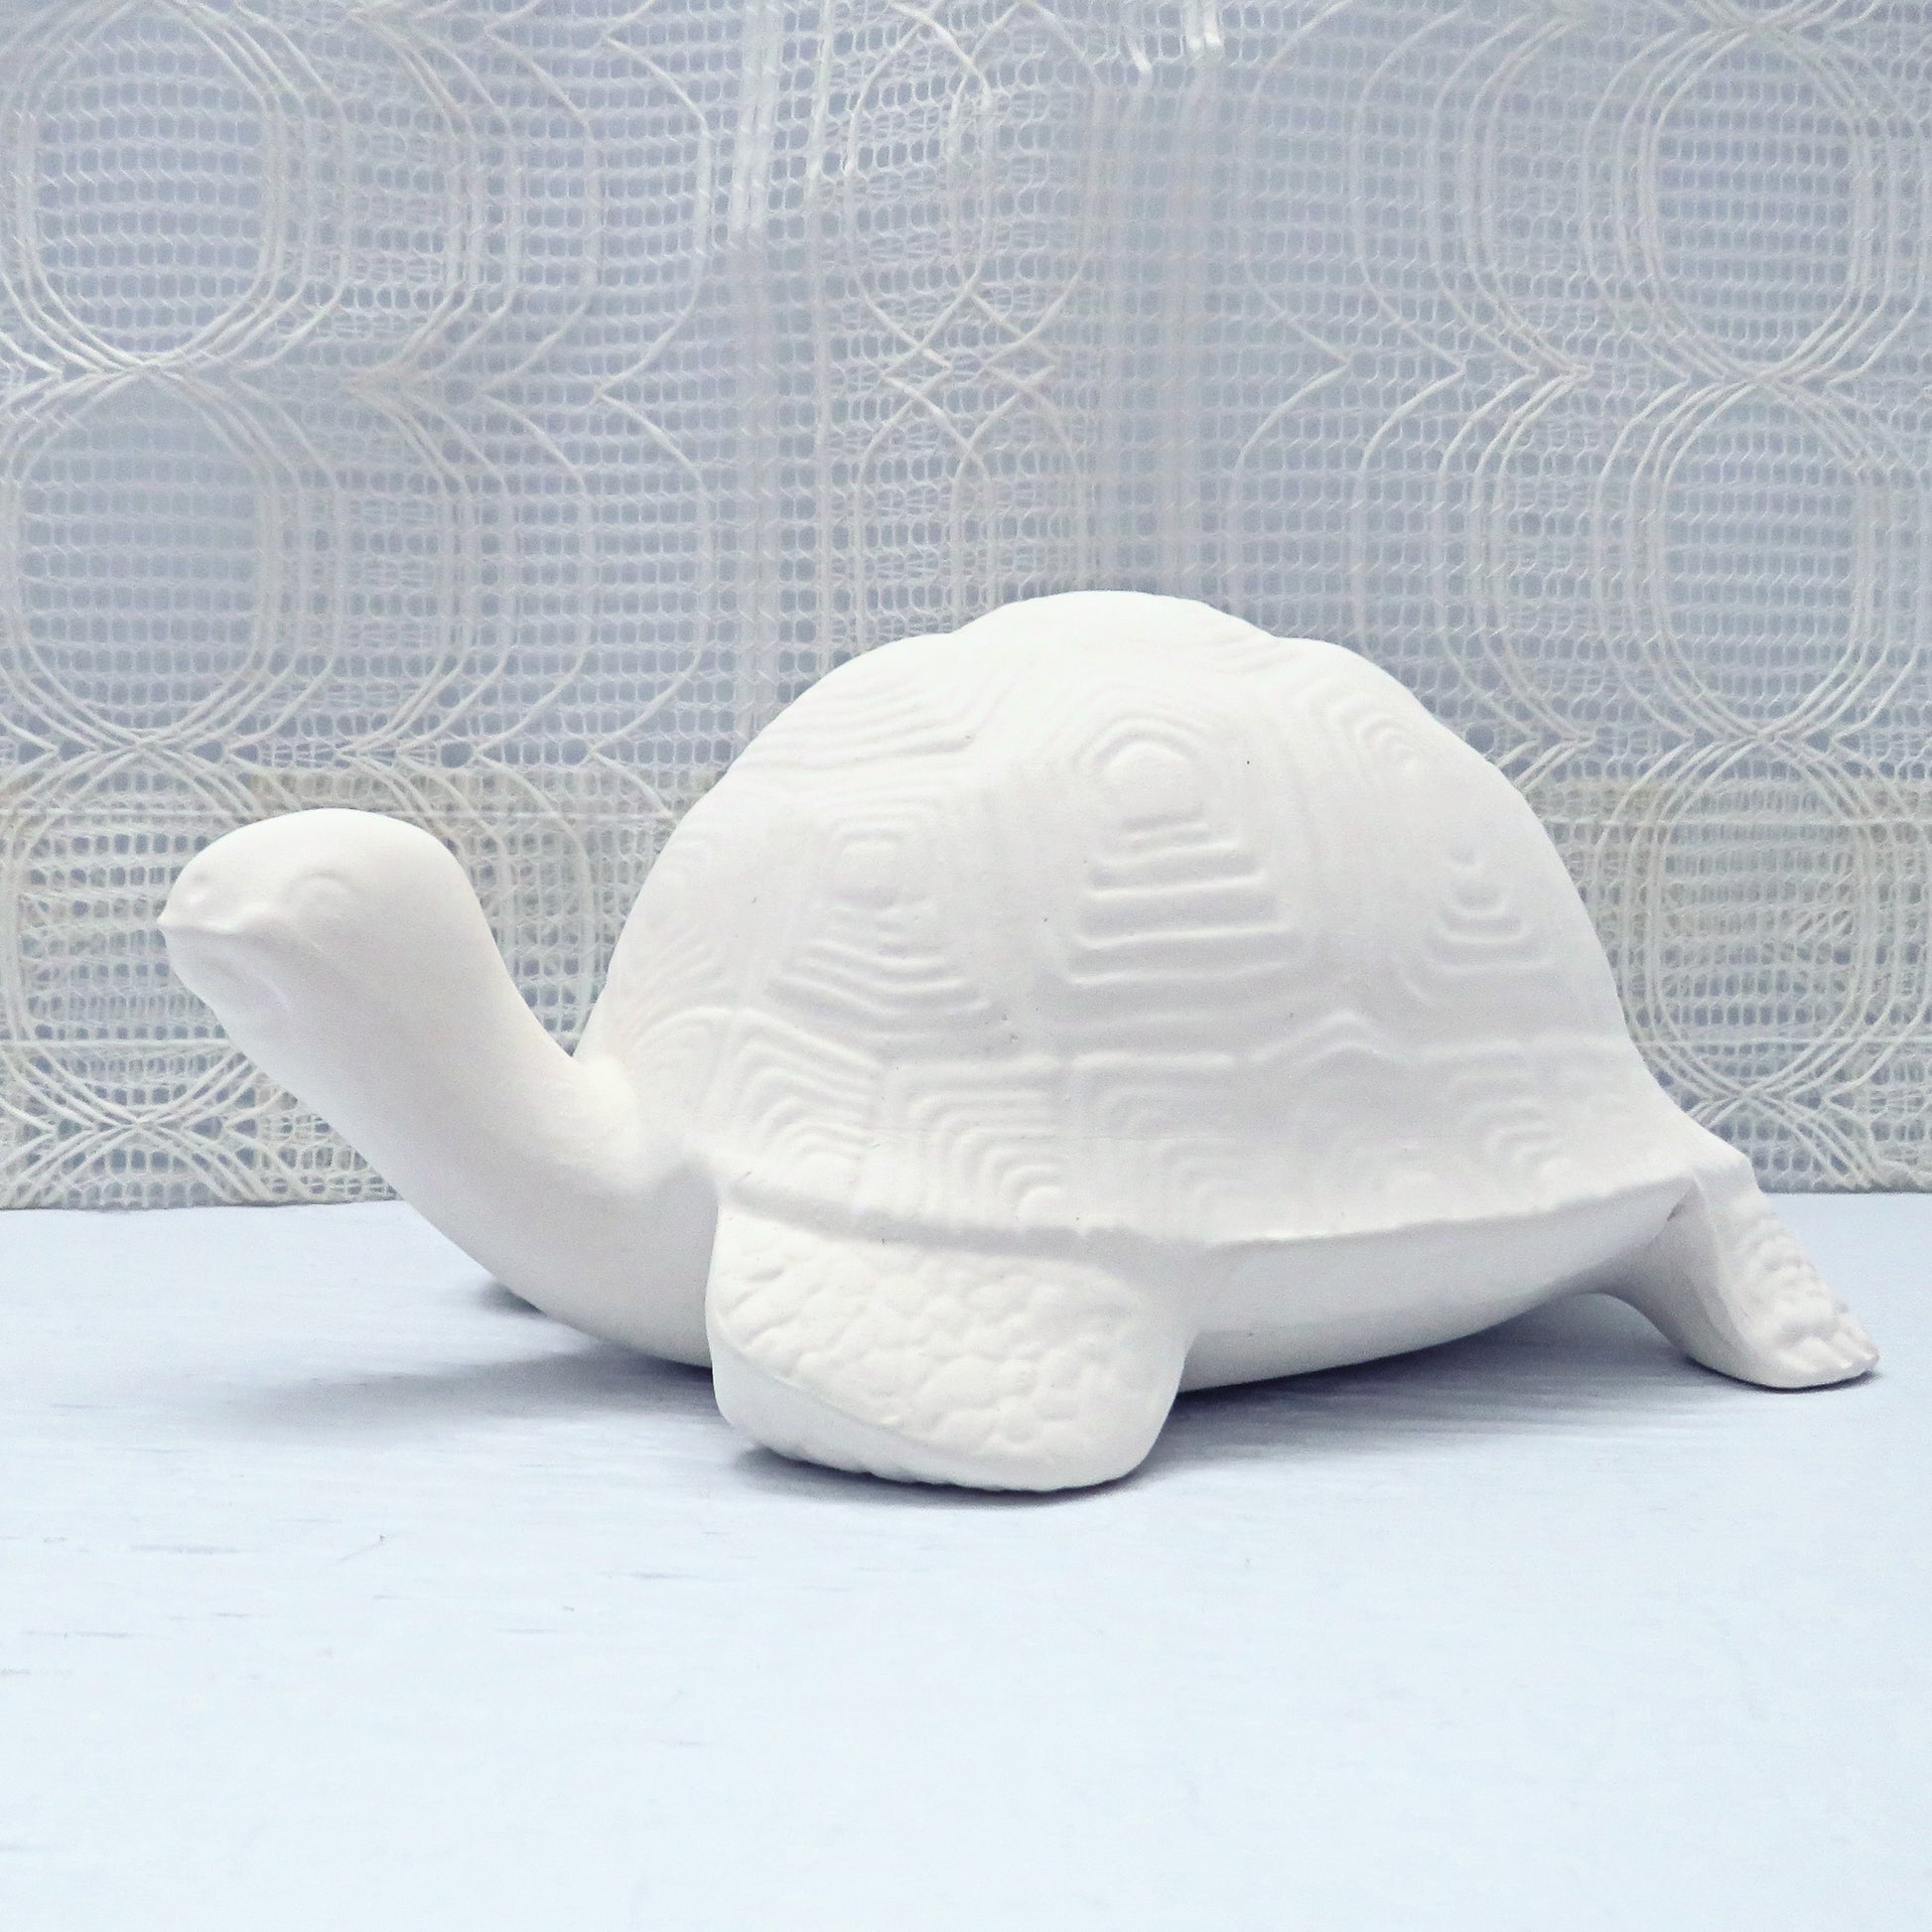 Side view of unpainted ceramic turtle on pale blue table and ecru lacy backdrop.